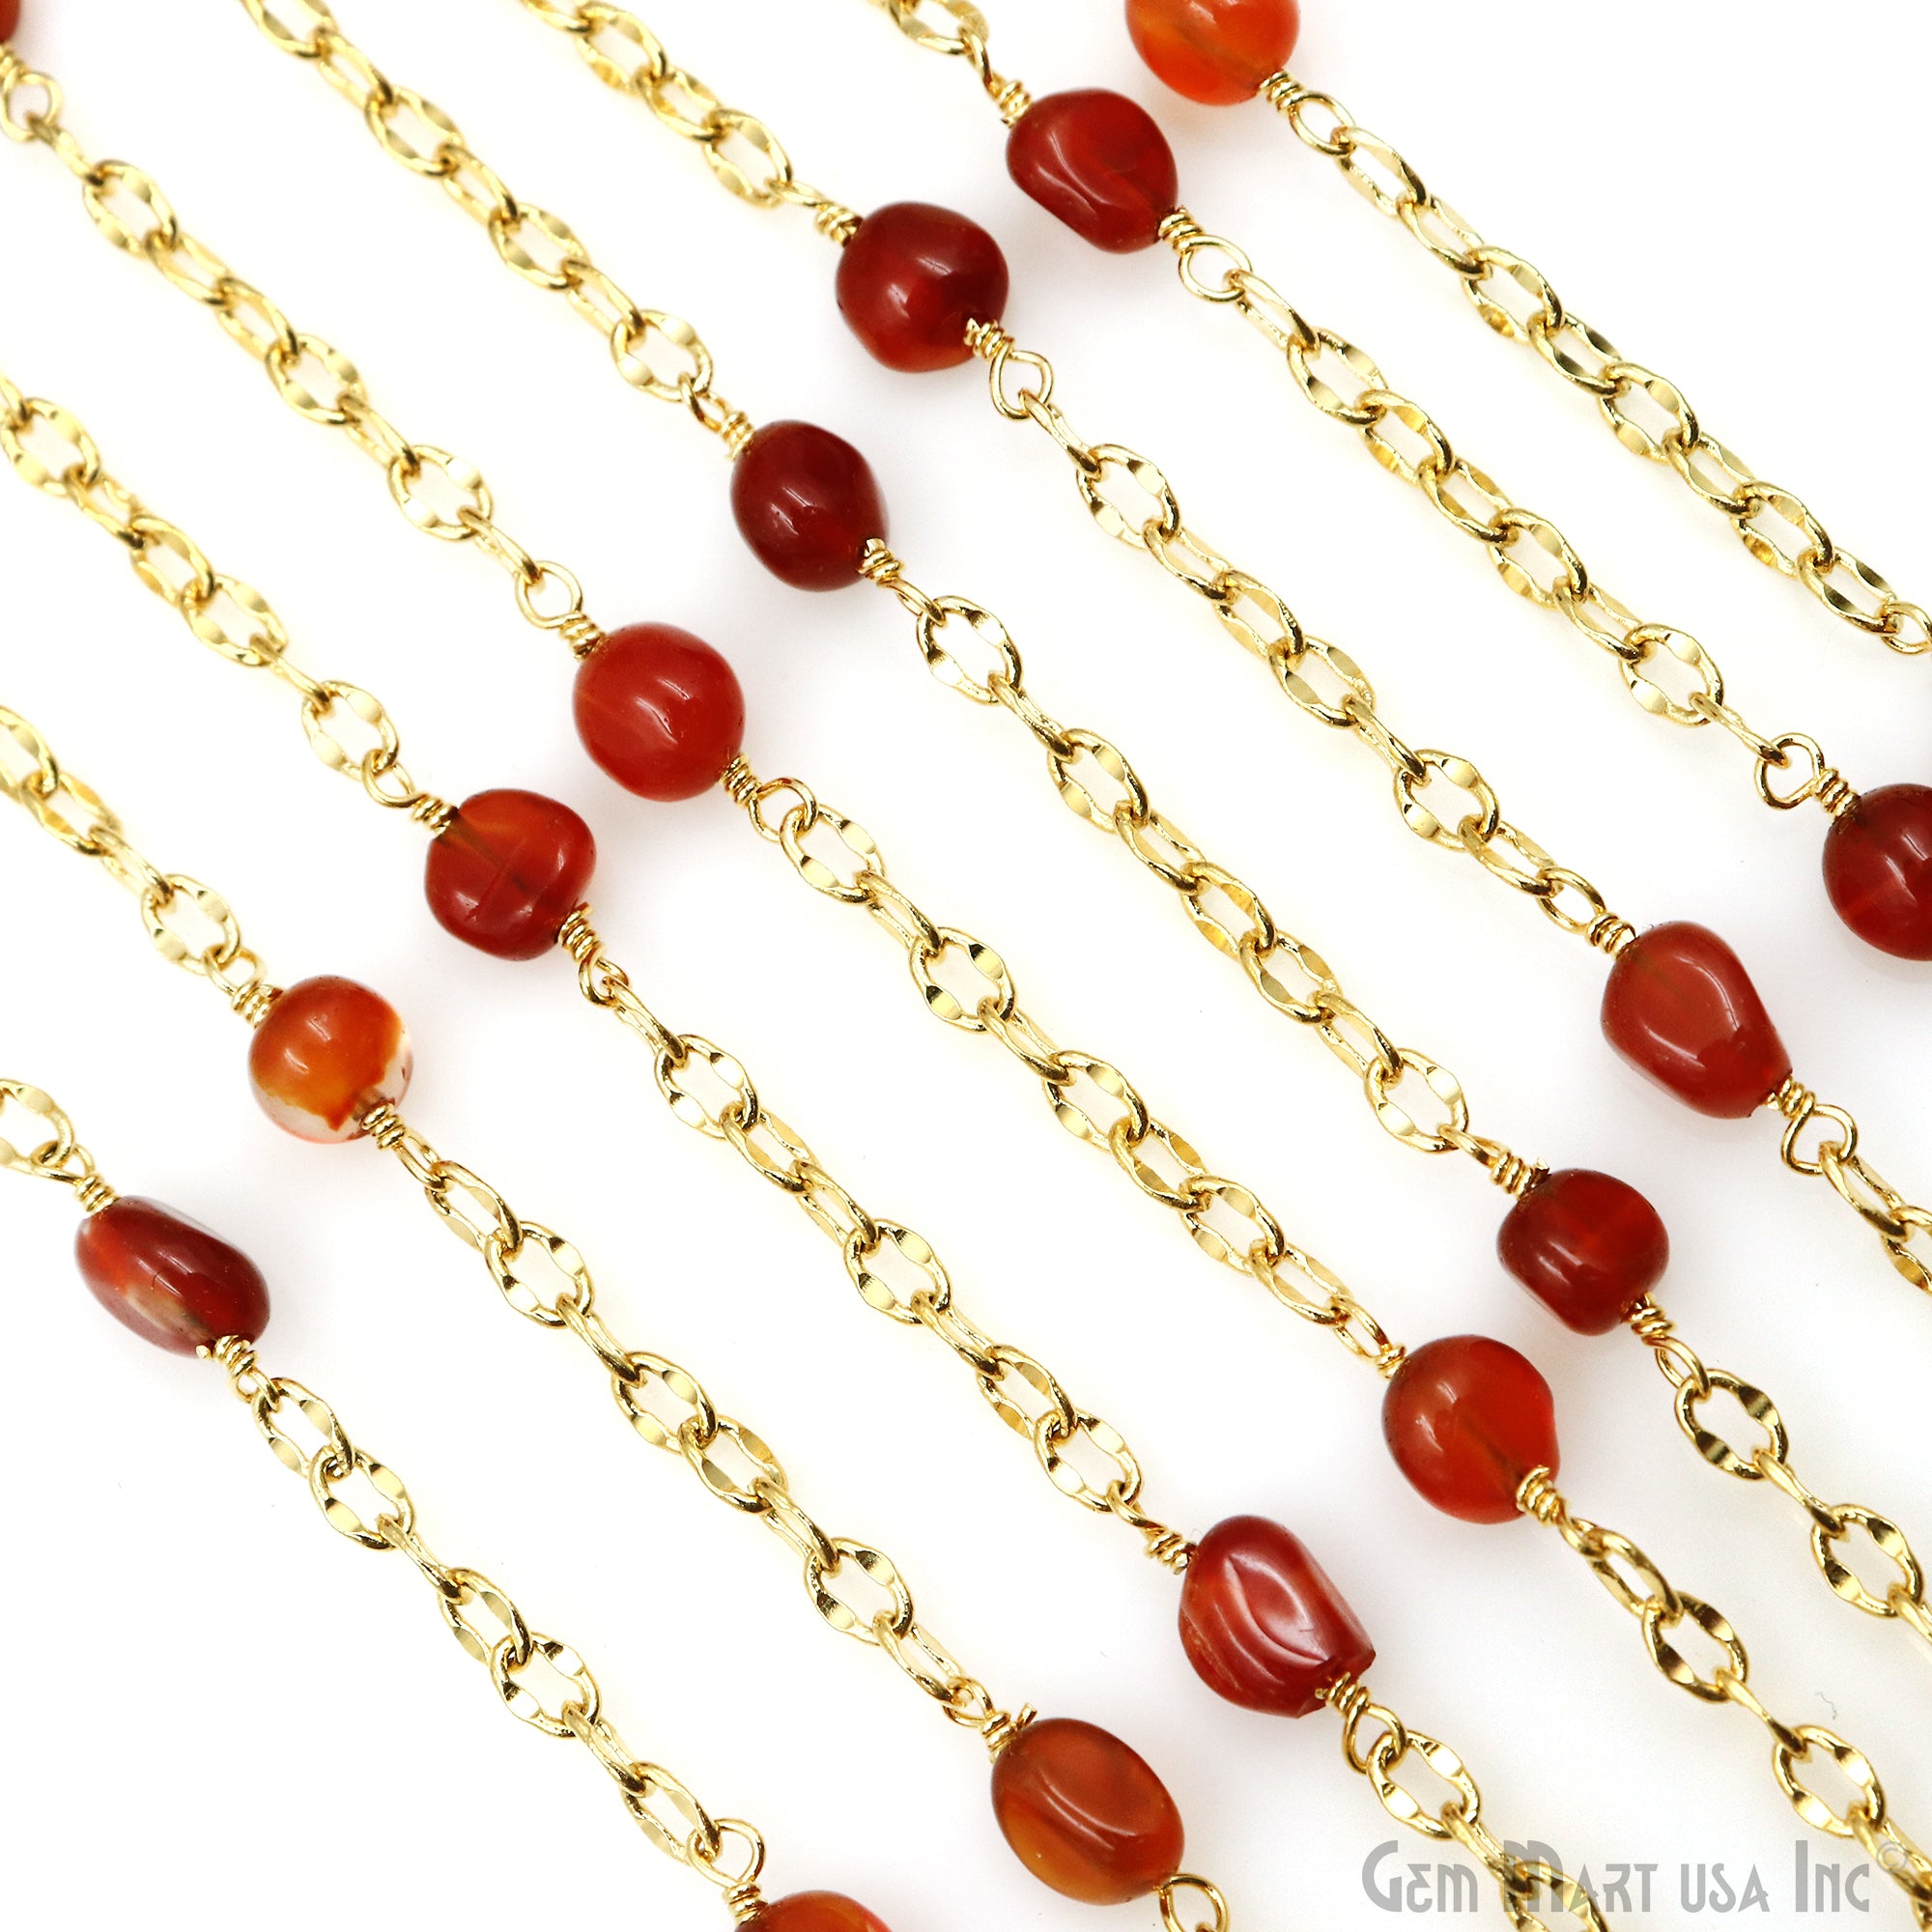 Carnelian Tumbled Beads 8x5mm Gold Plated Wire Wrapped Rosary Chain